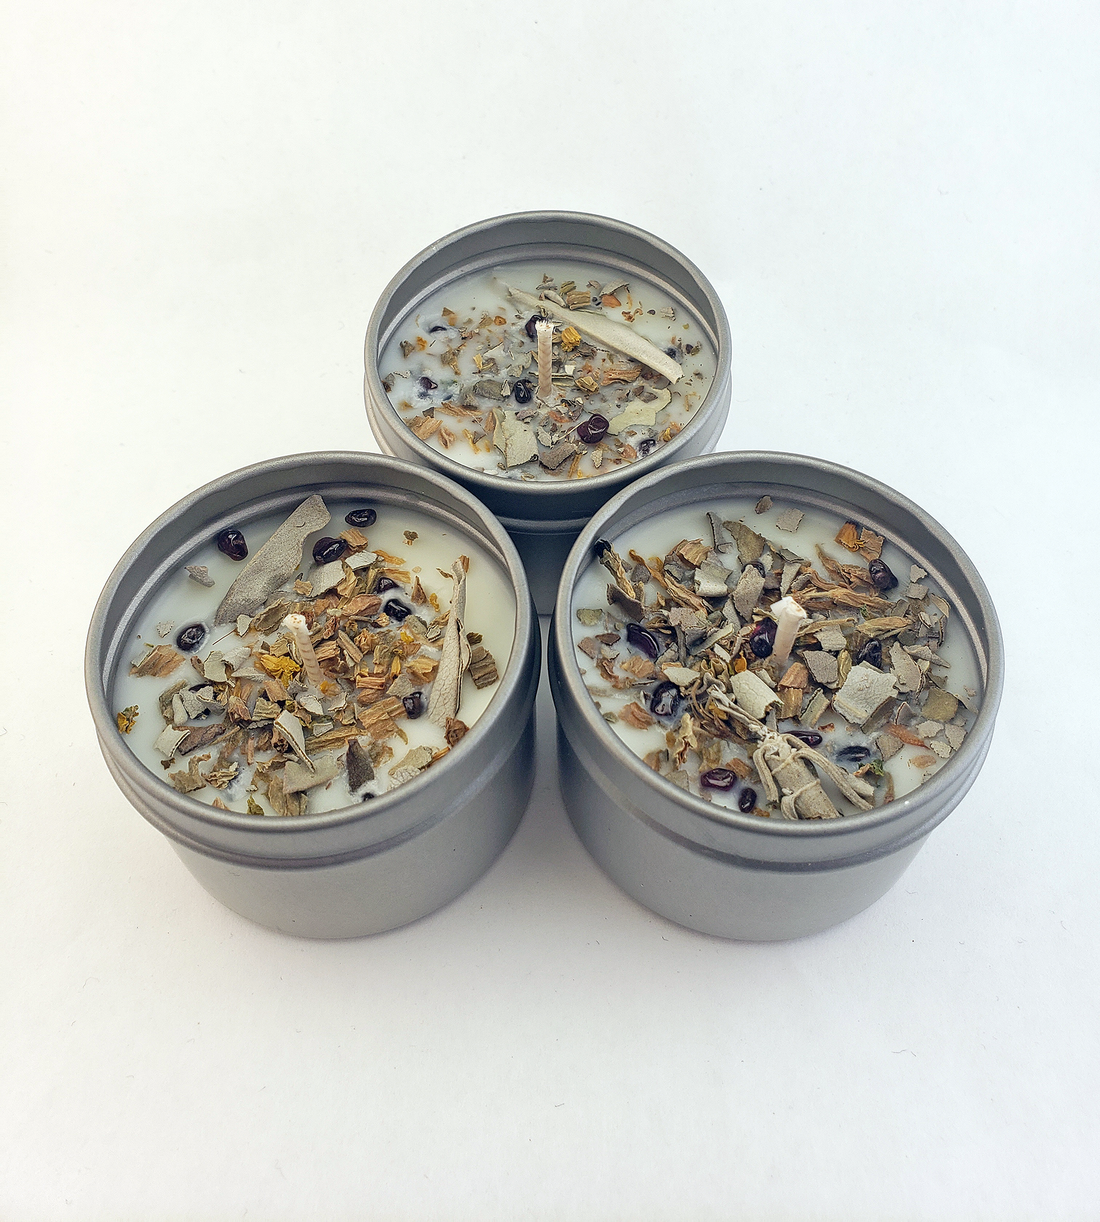 Motivation - 2oz Coconut Soy Wax Handmade Scented Candle - Grapefruit and Ginger Essential Oils Scented - Decorated with Garnet Crystal Chips and Dried Herbs